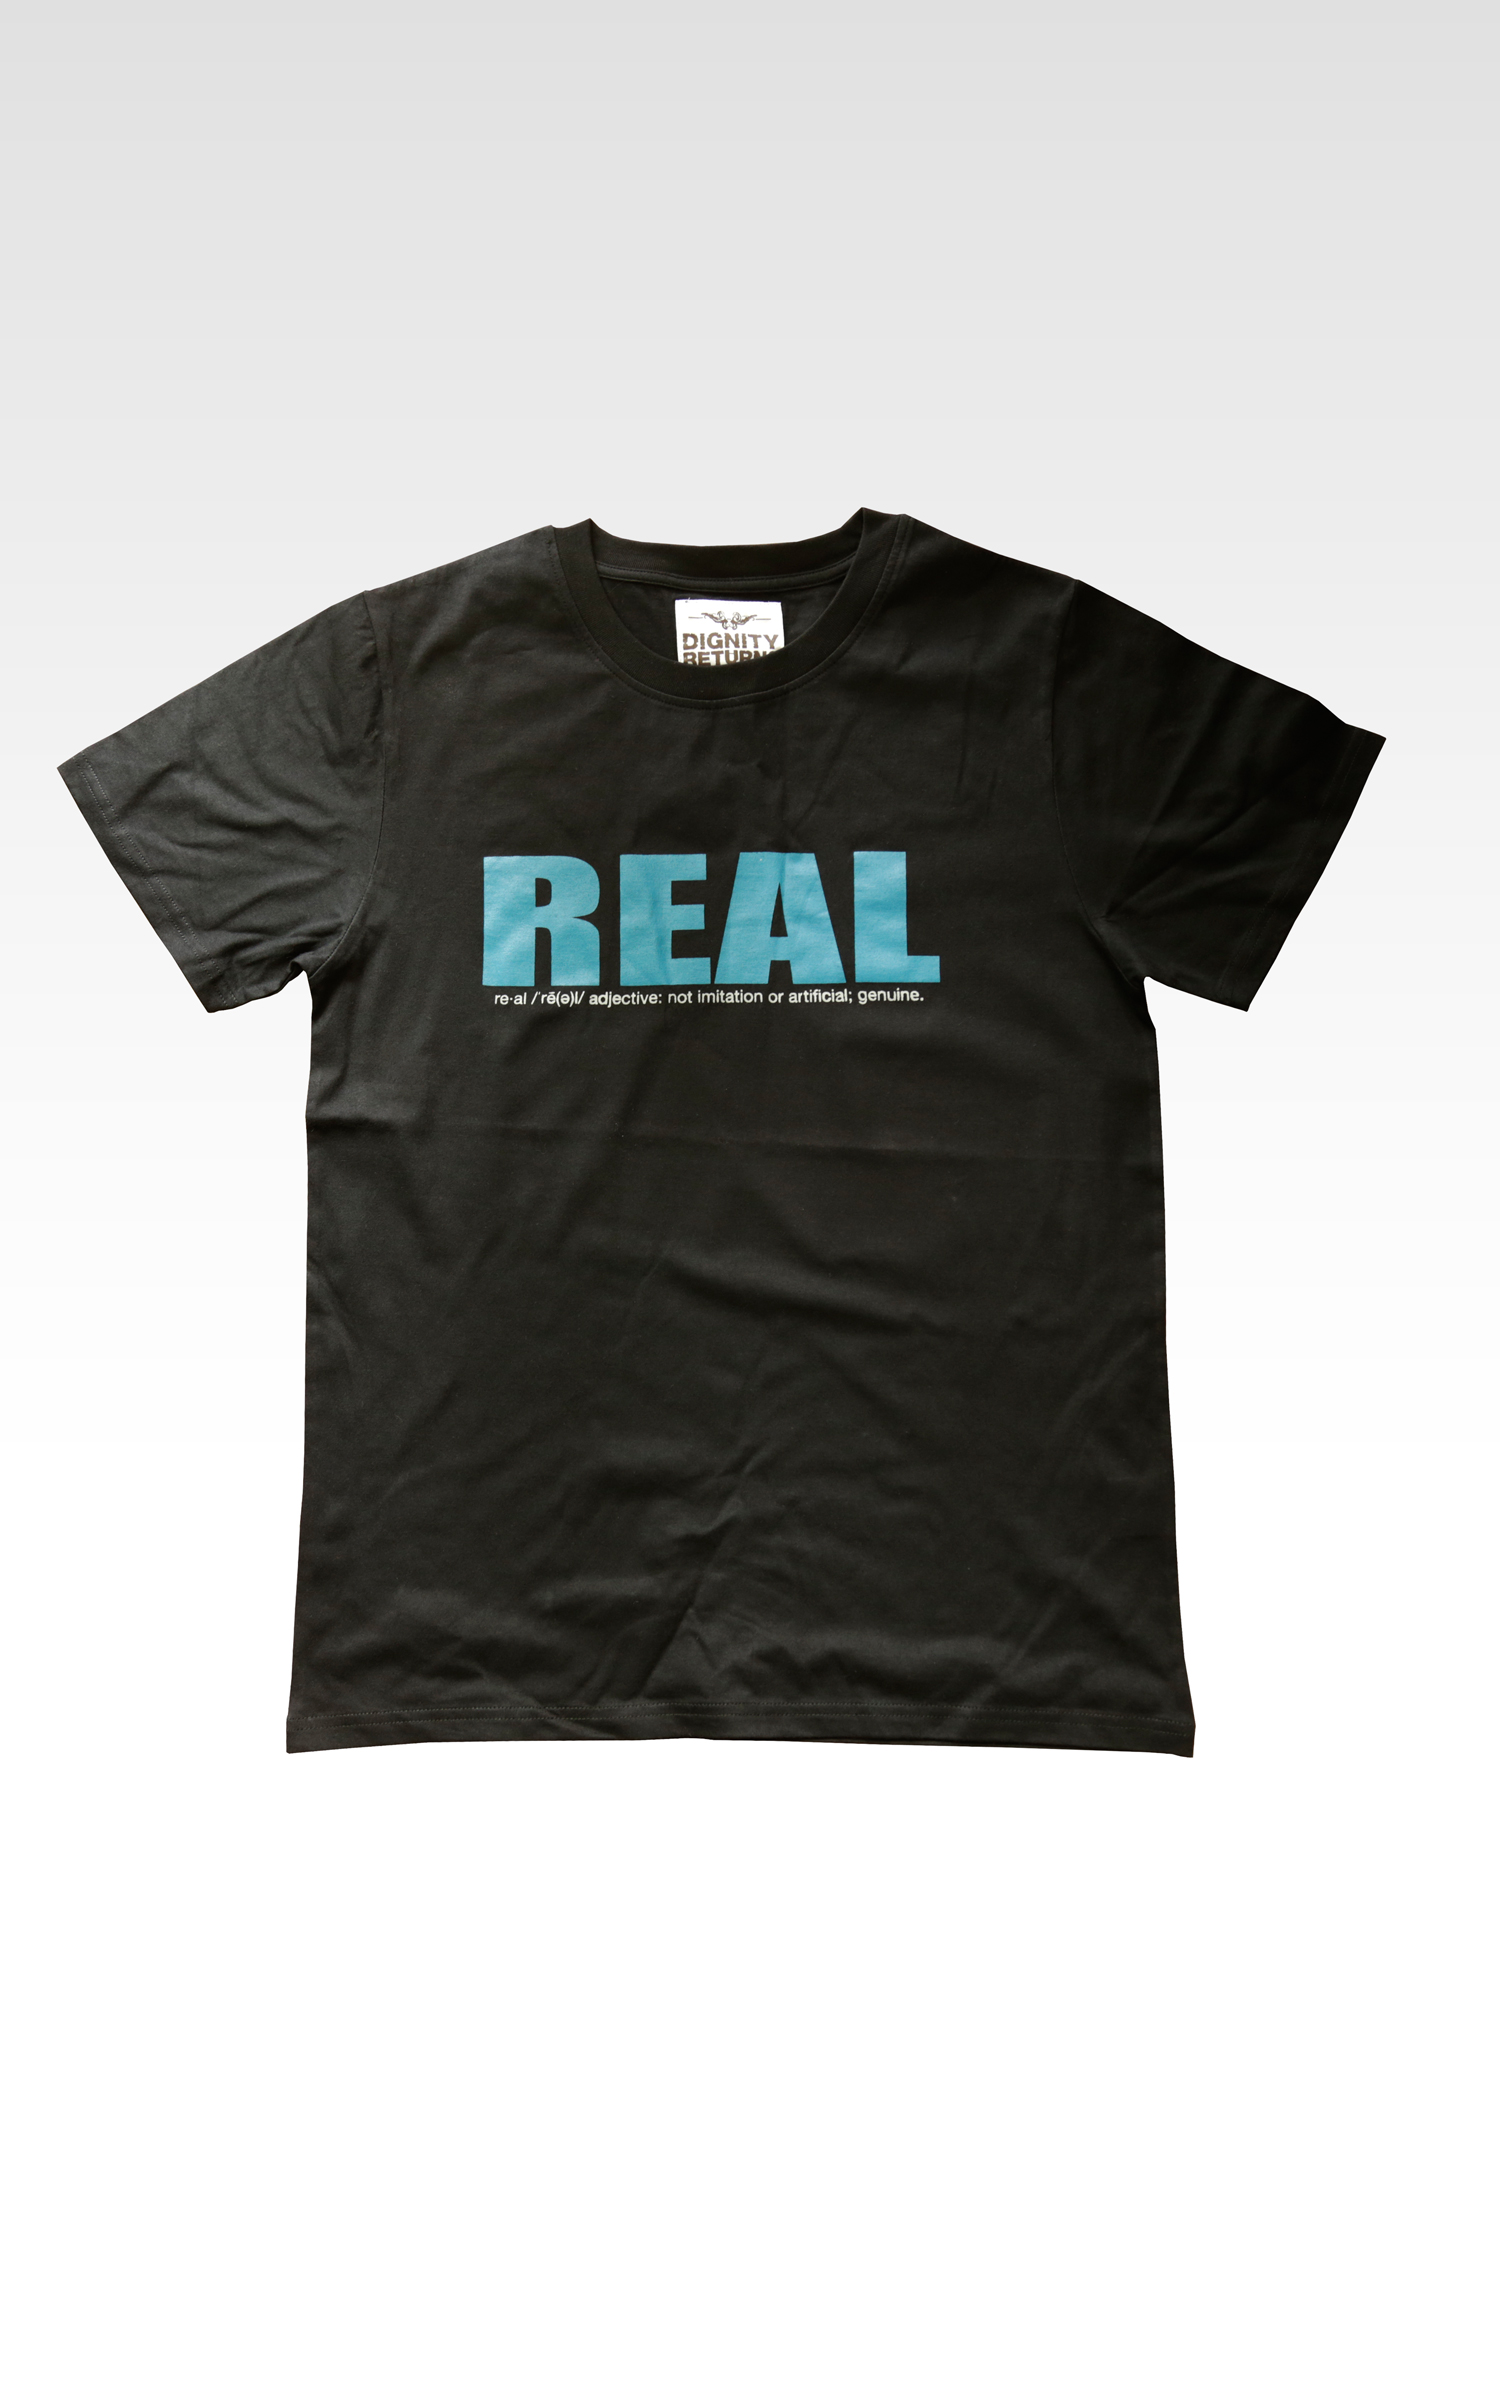 REAL Black Anthracite Favourite Short-Sleeve Crew Tee